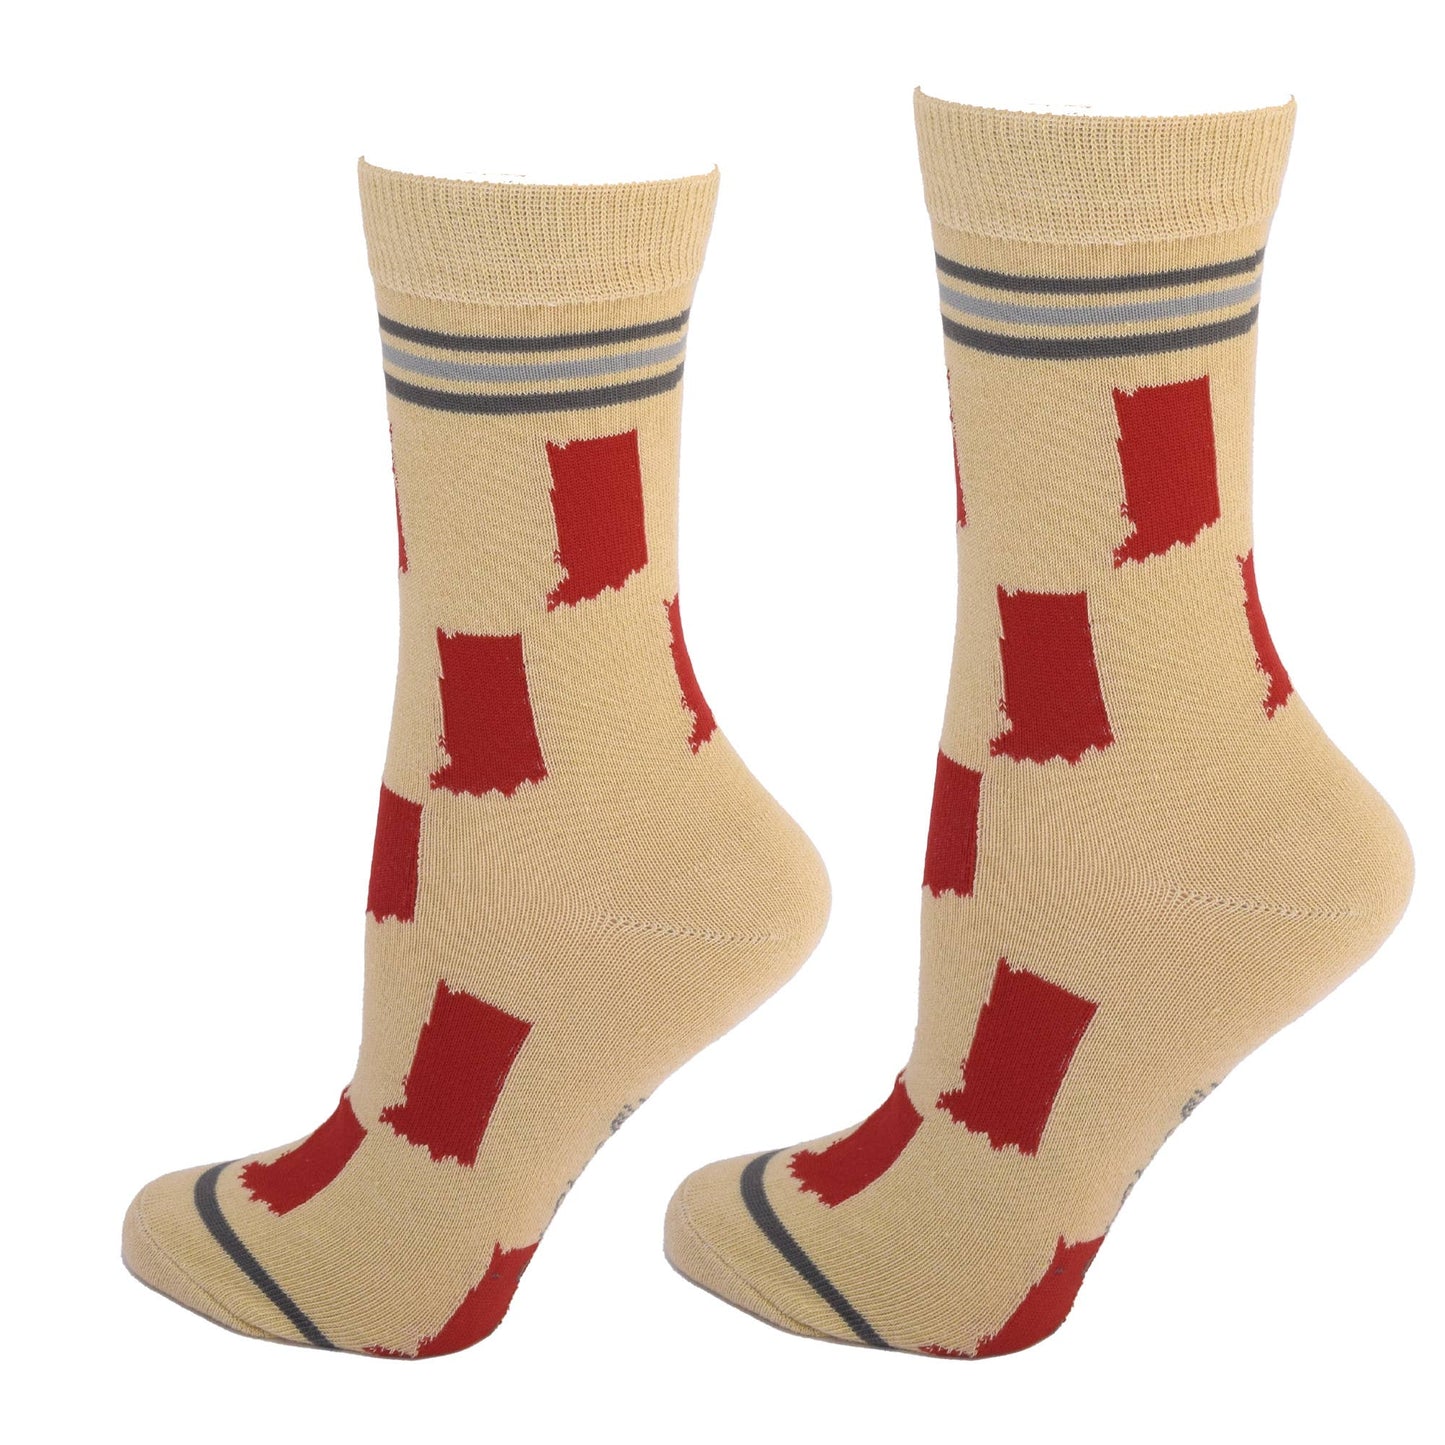 Buy Socks You All - Indiana State Shapes Crimson and Cream Women's Socks